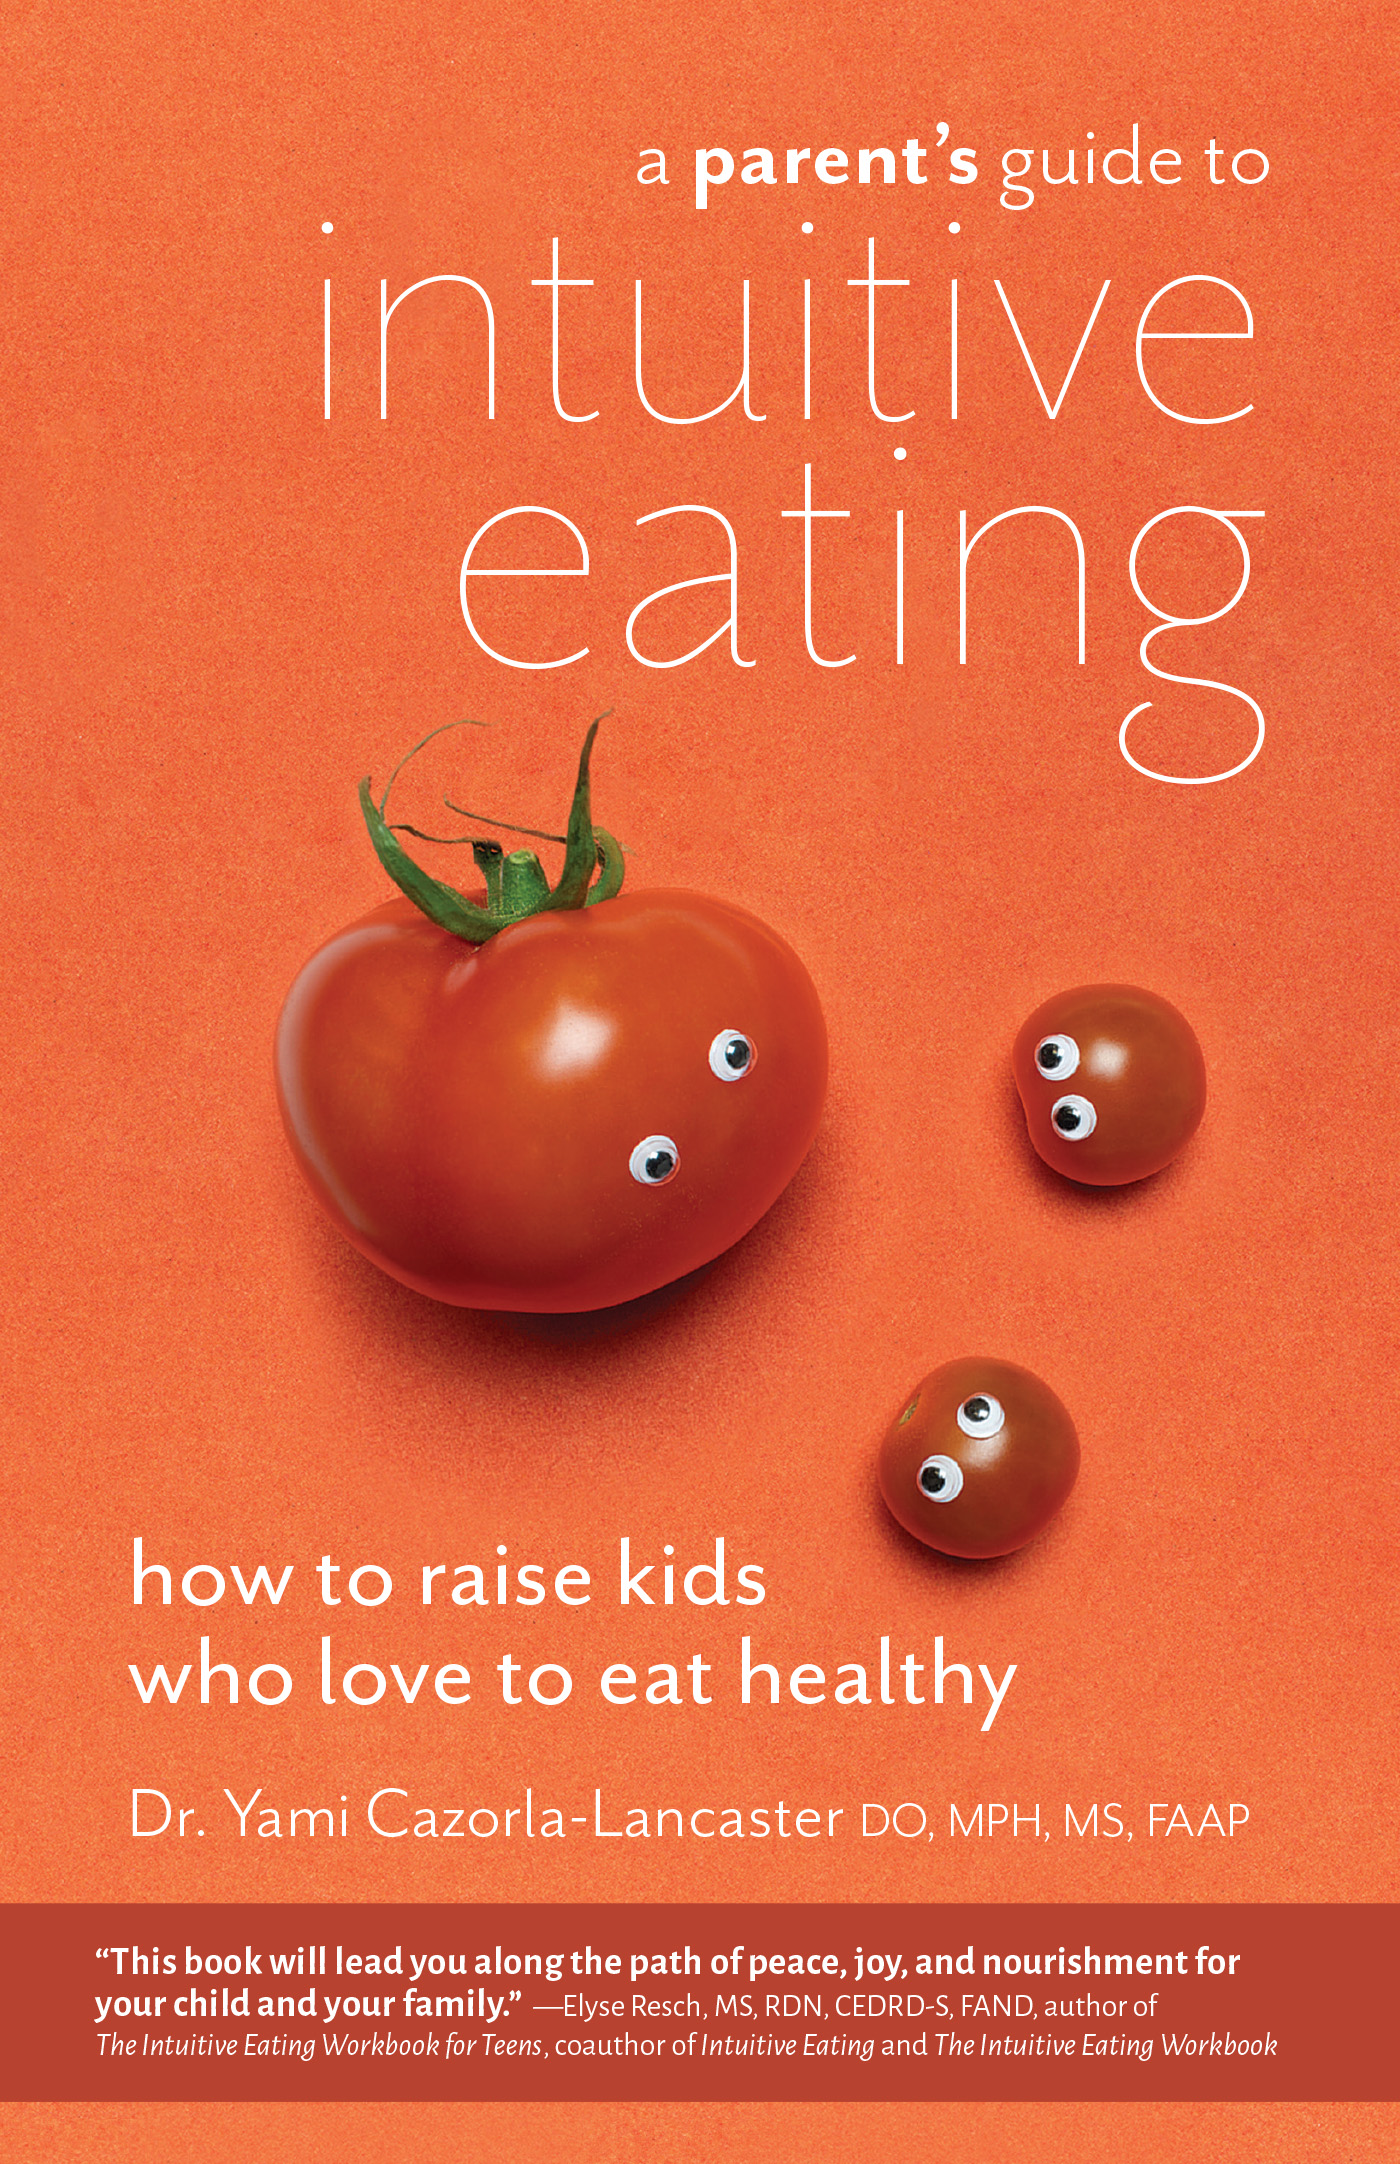 A Parent’s Guide to Intuitive Eating-front.indd